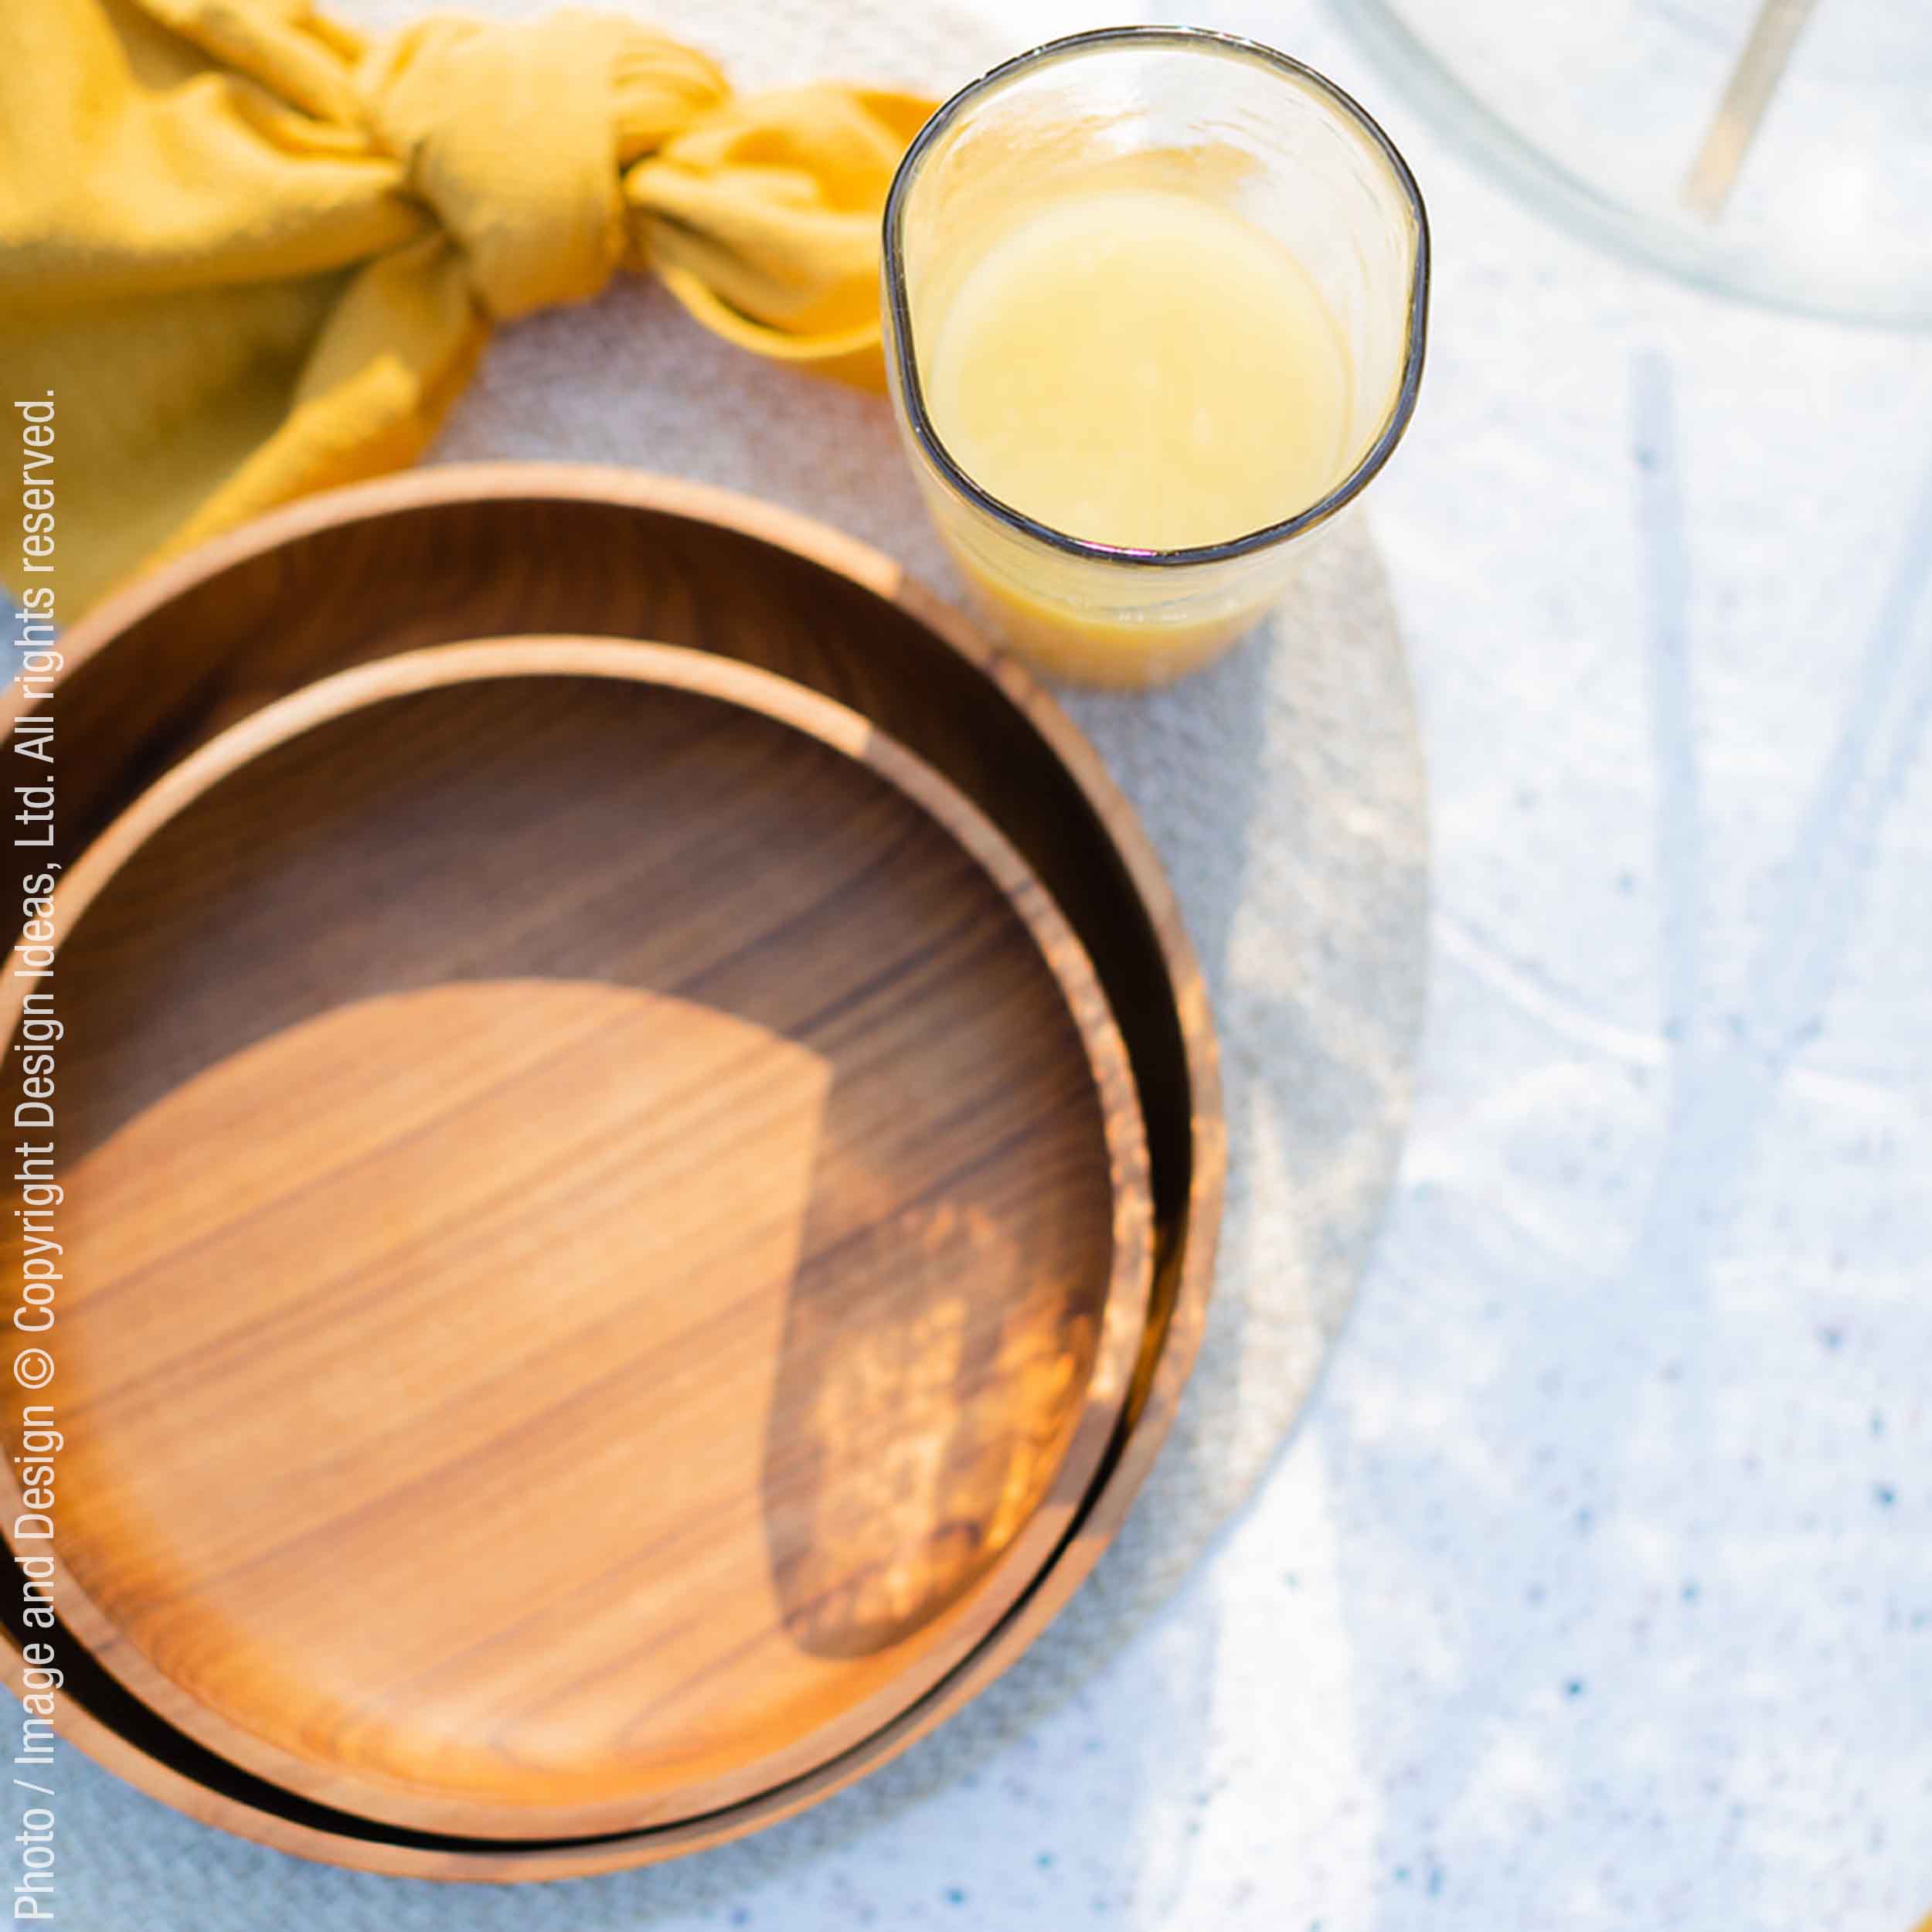 Chiku™ bowl (8.3" dia) - Natural | Image 2 | Premium Bowl from the Chiku collection | made with Teak wood for long lasting use | sustainably sourced with recycled materials | texxture